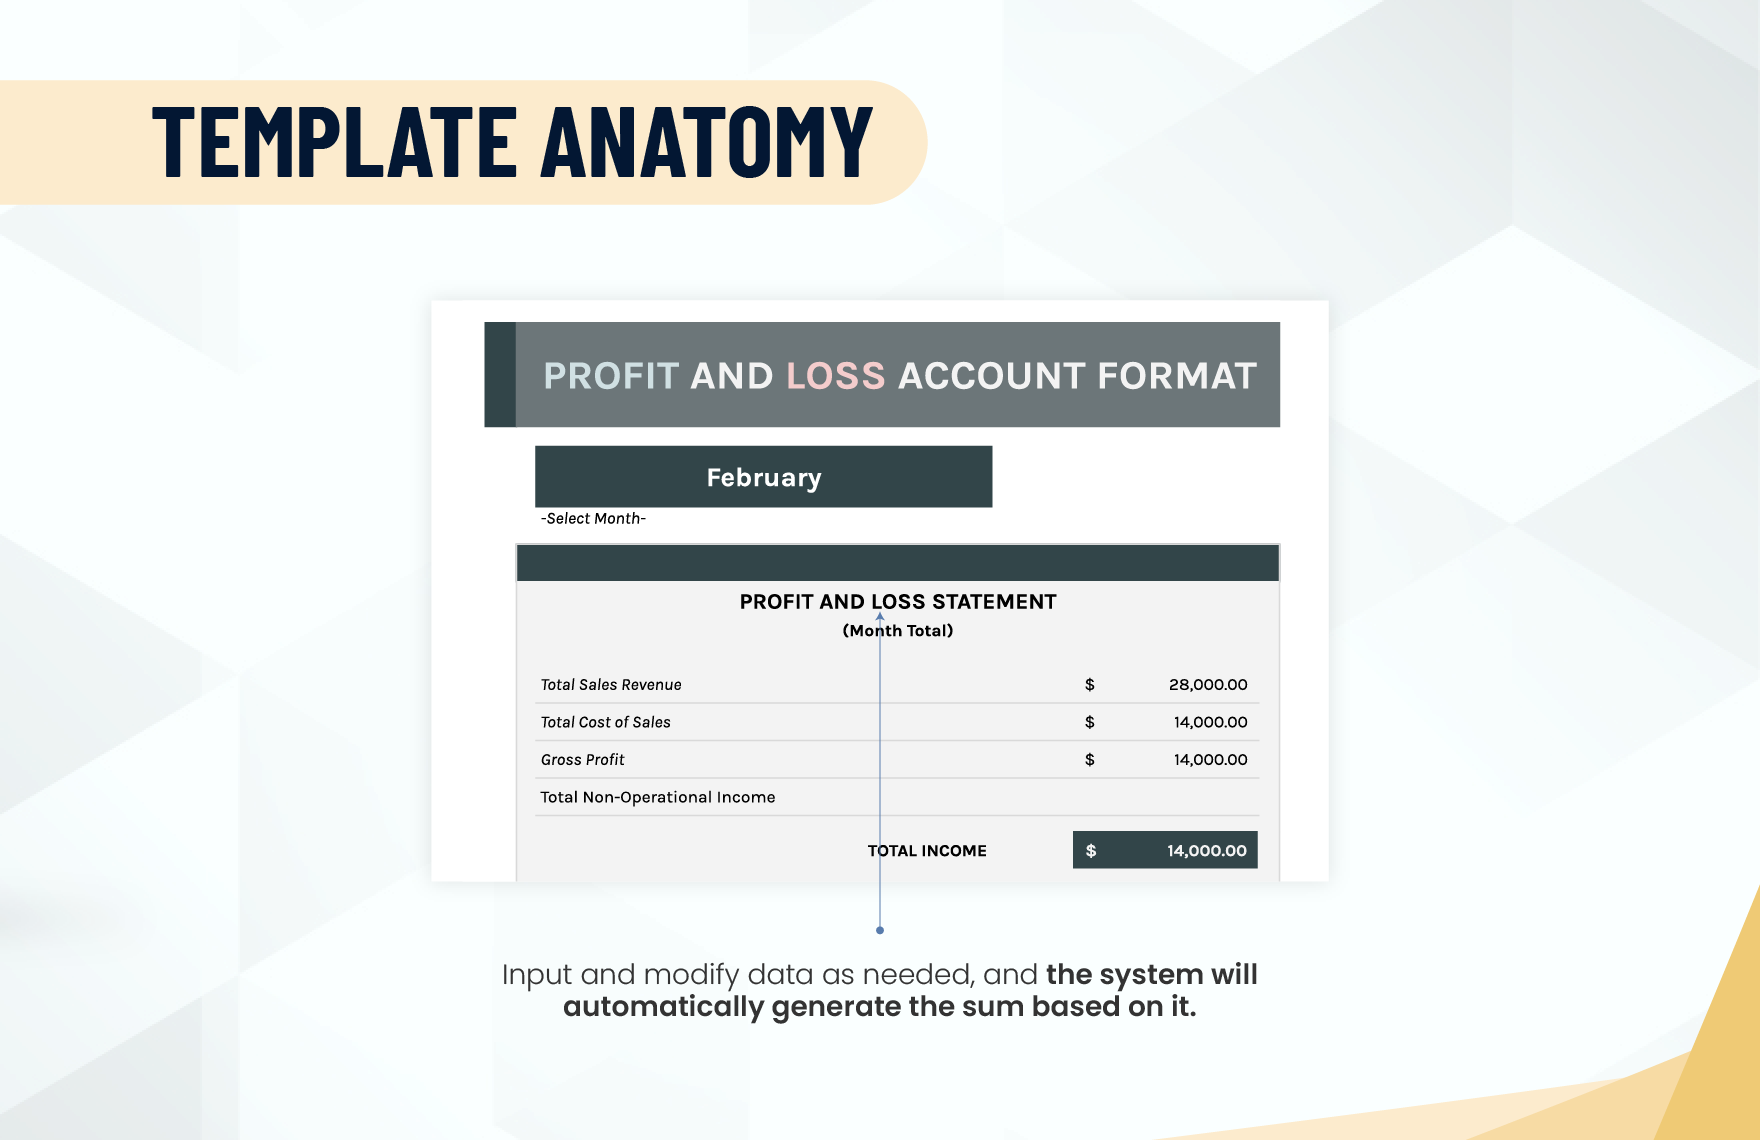 Profit and Loss Account Format Template